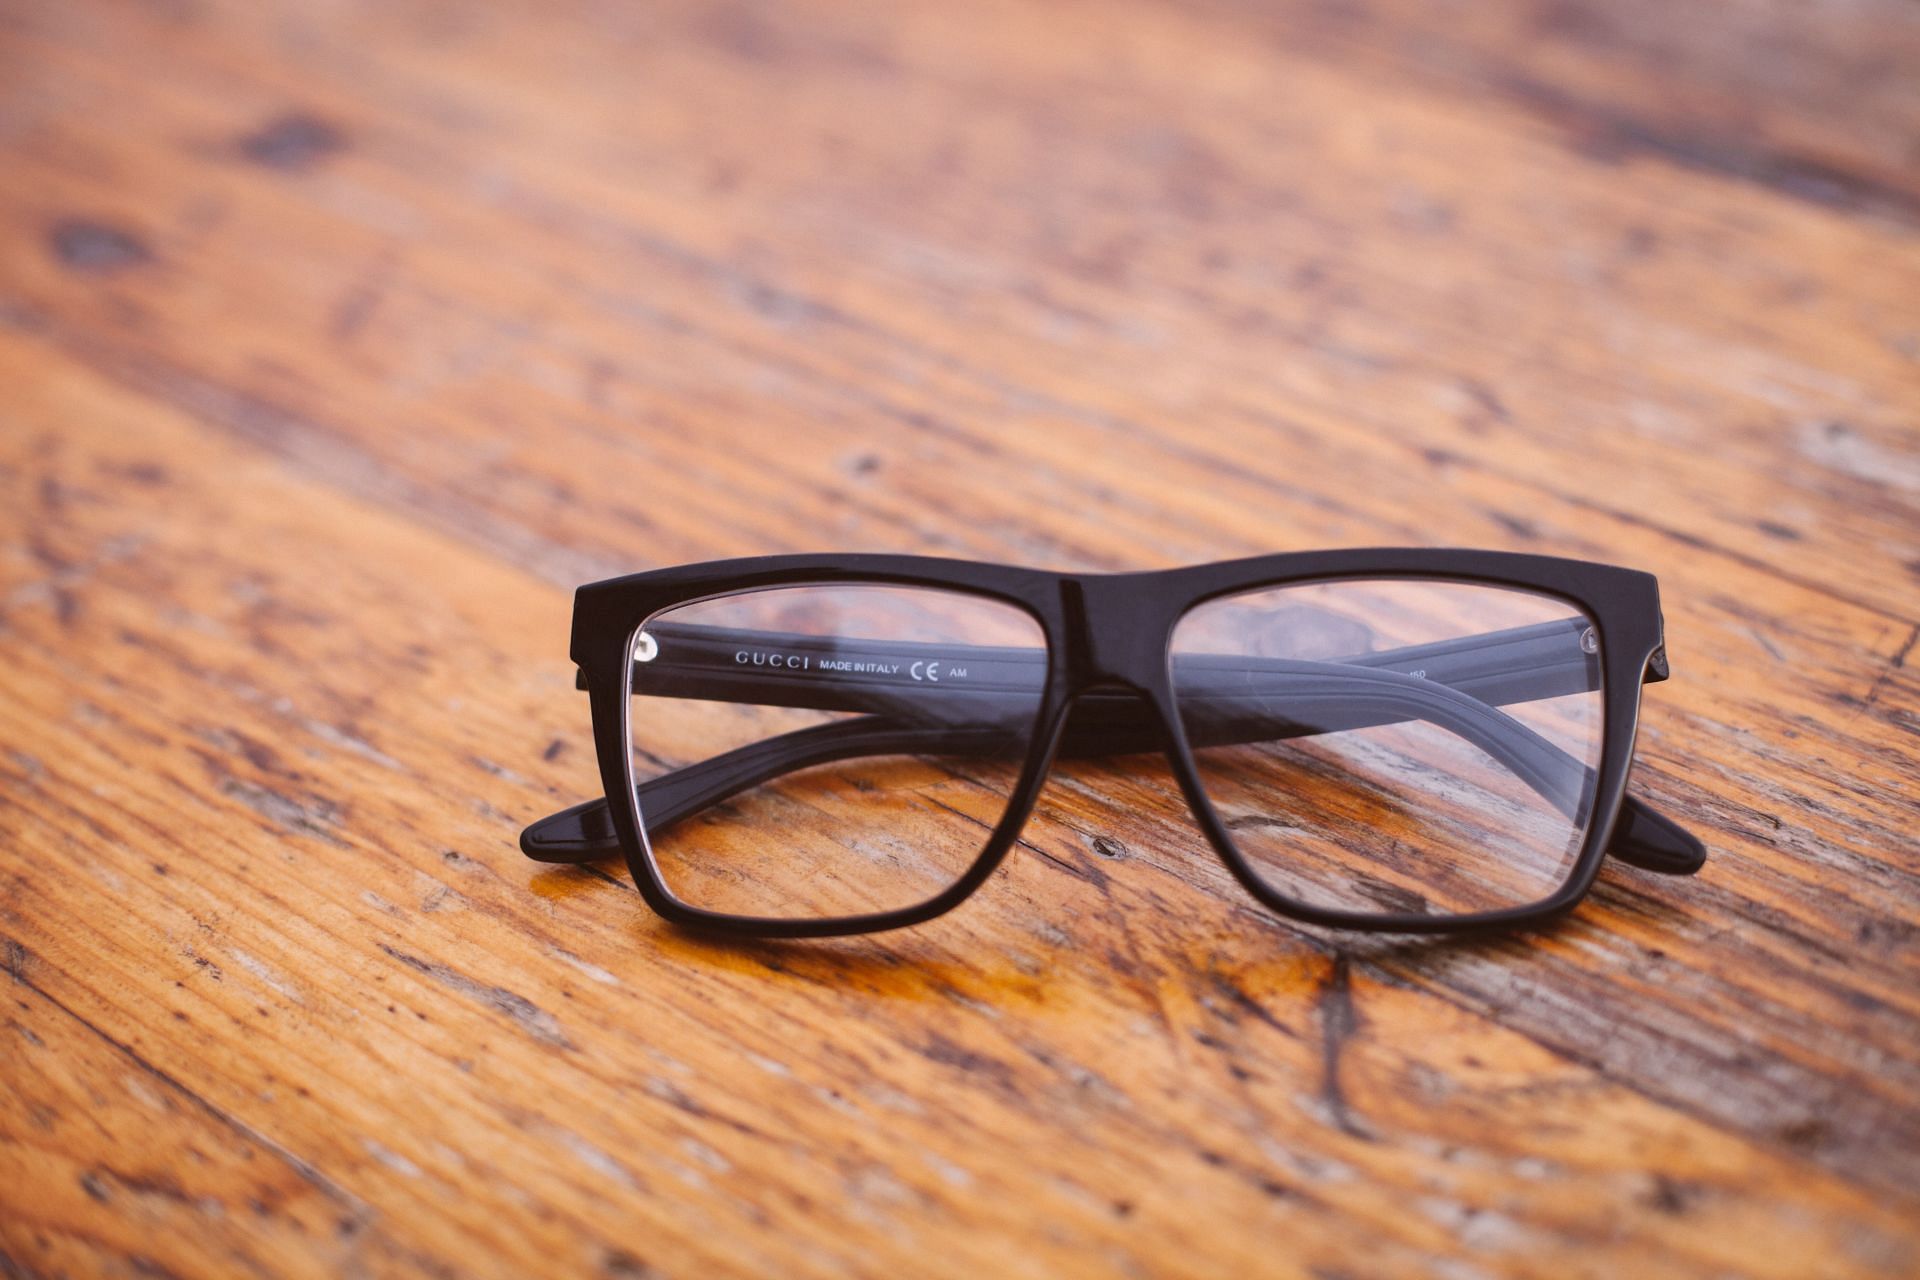 Using corrective lenses is the first line treatment. (Image via Unsplash/ Clem Onojeghuo)